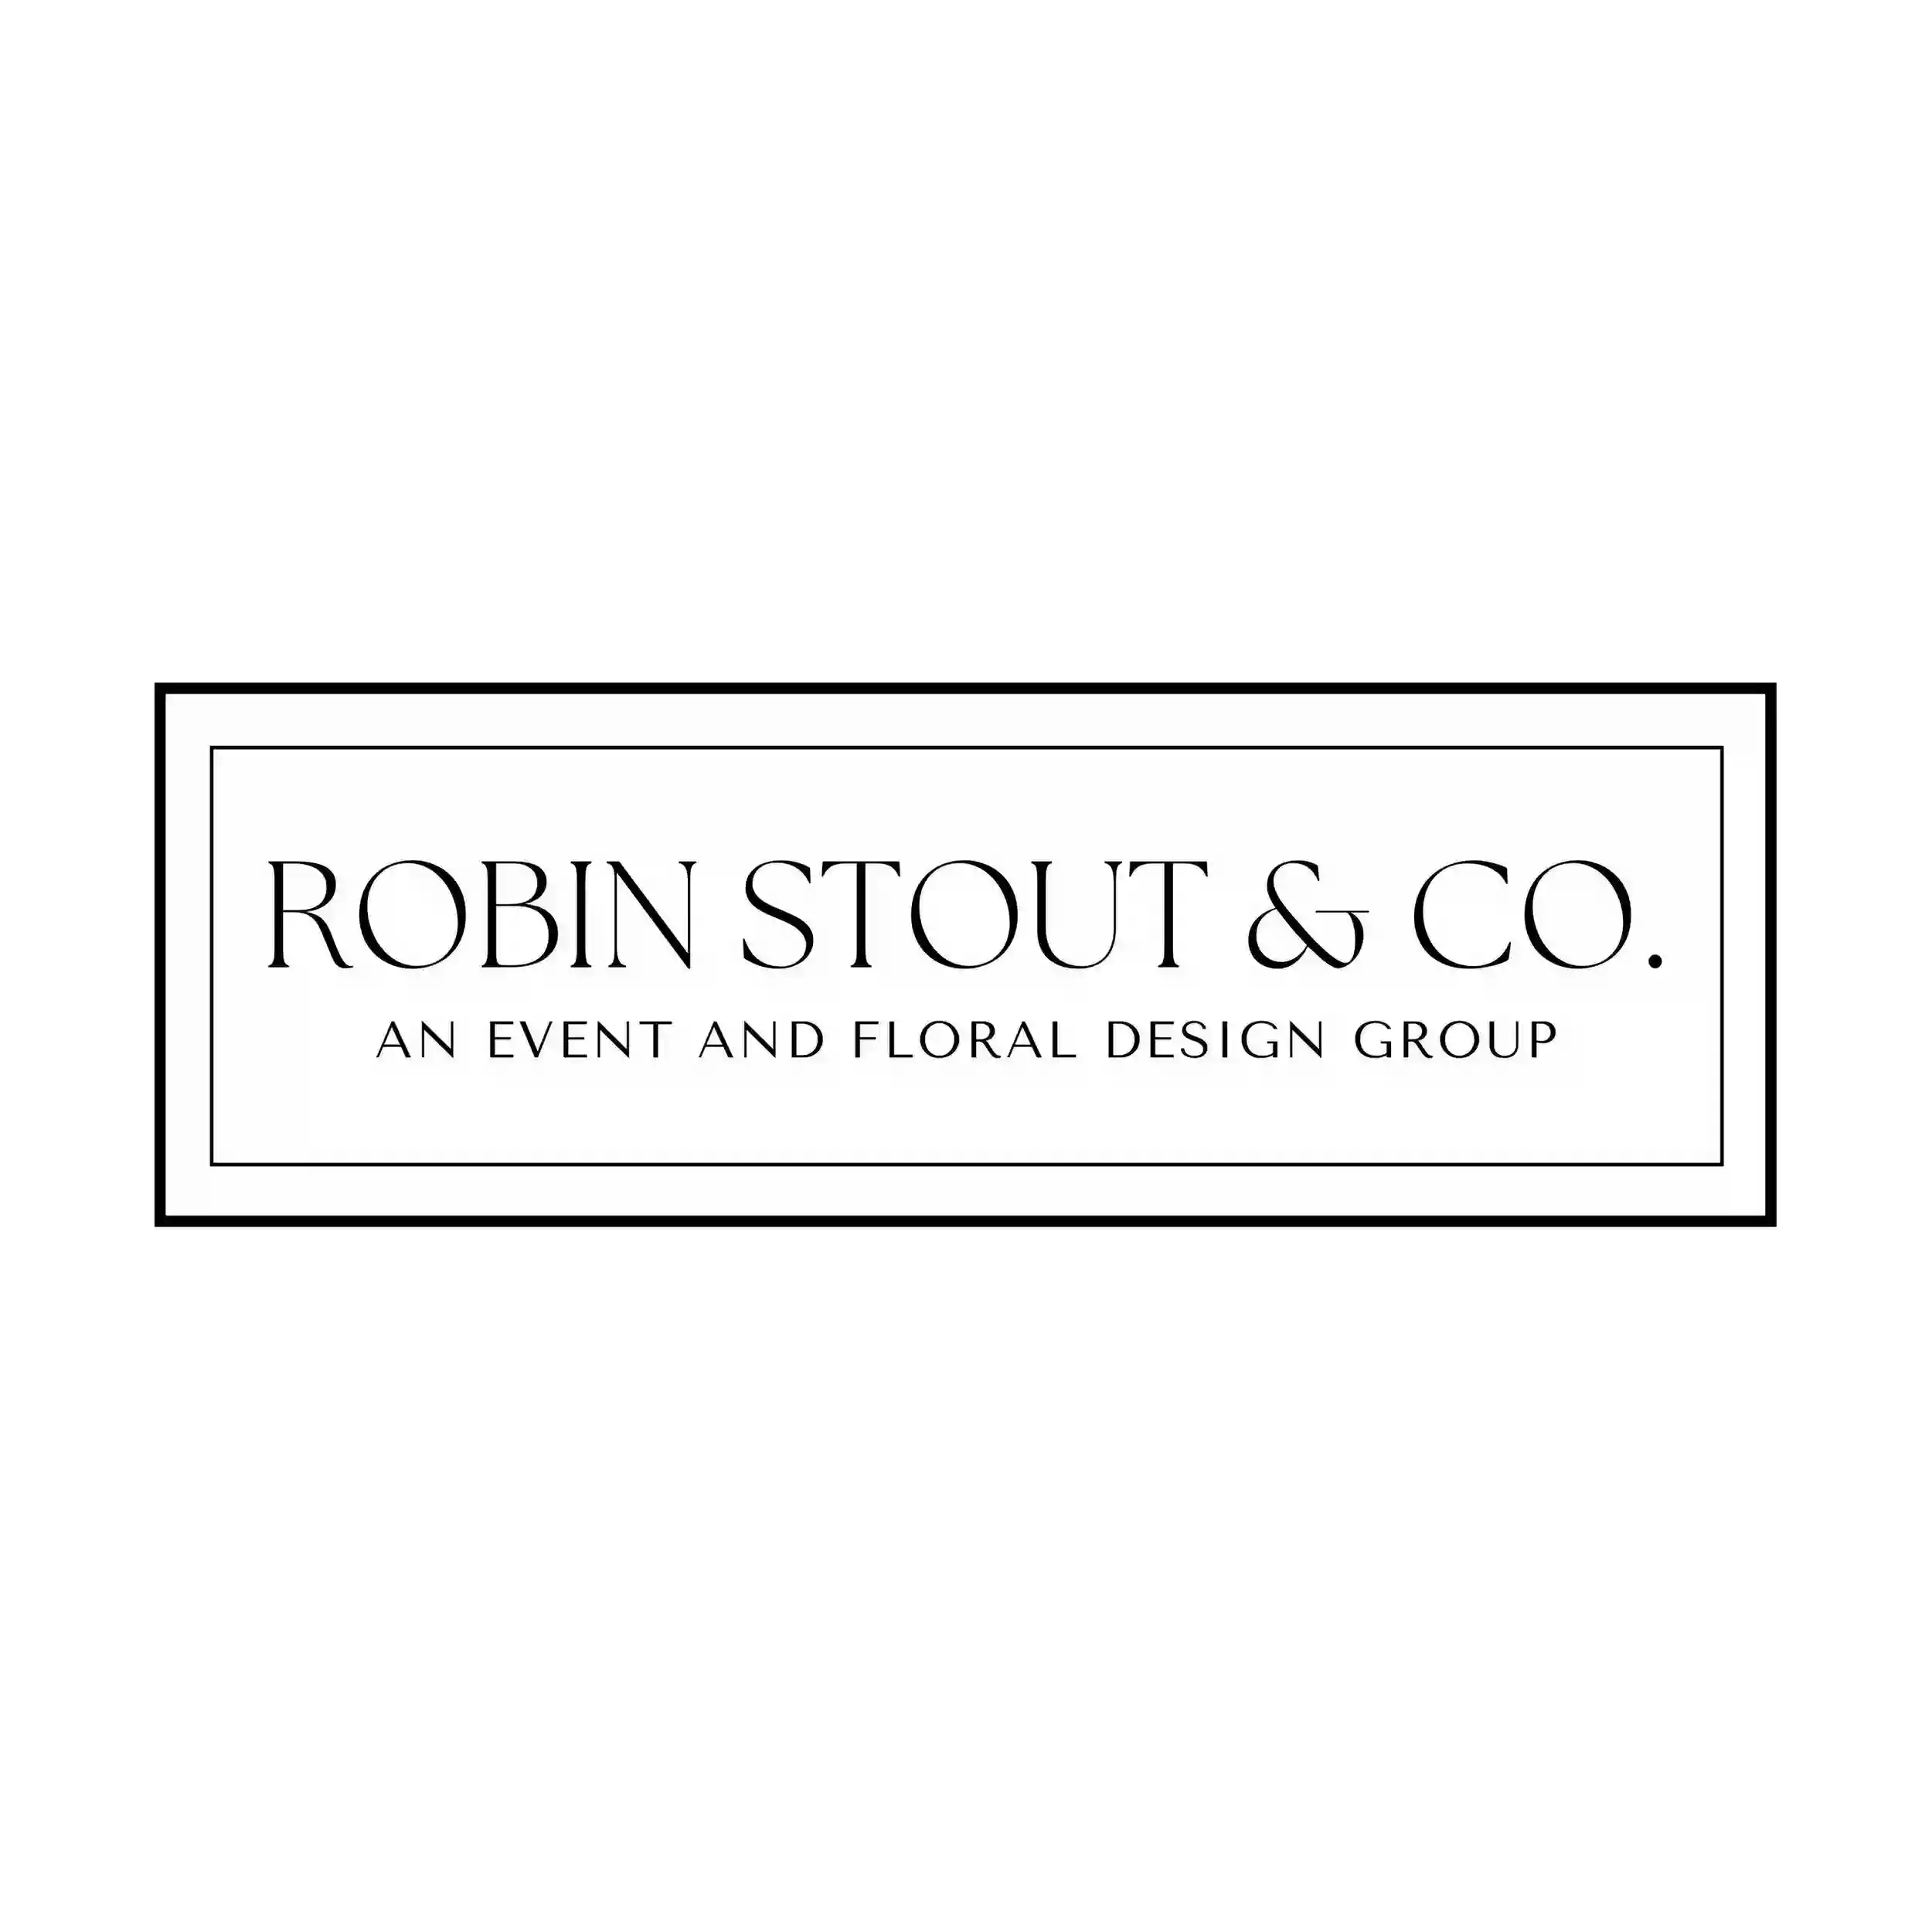 Robin Stout & Co. Florist and Event Planner